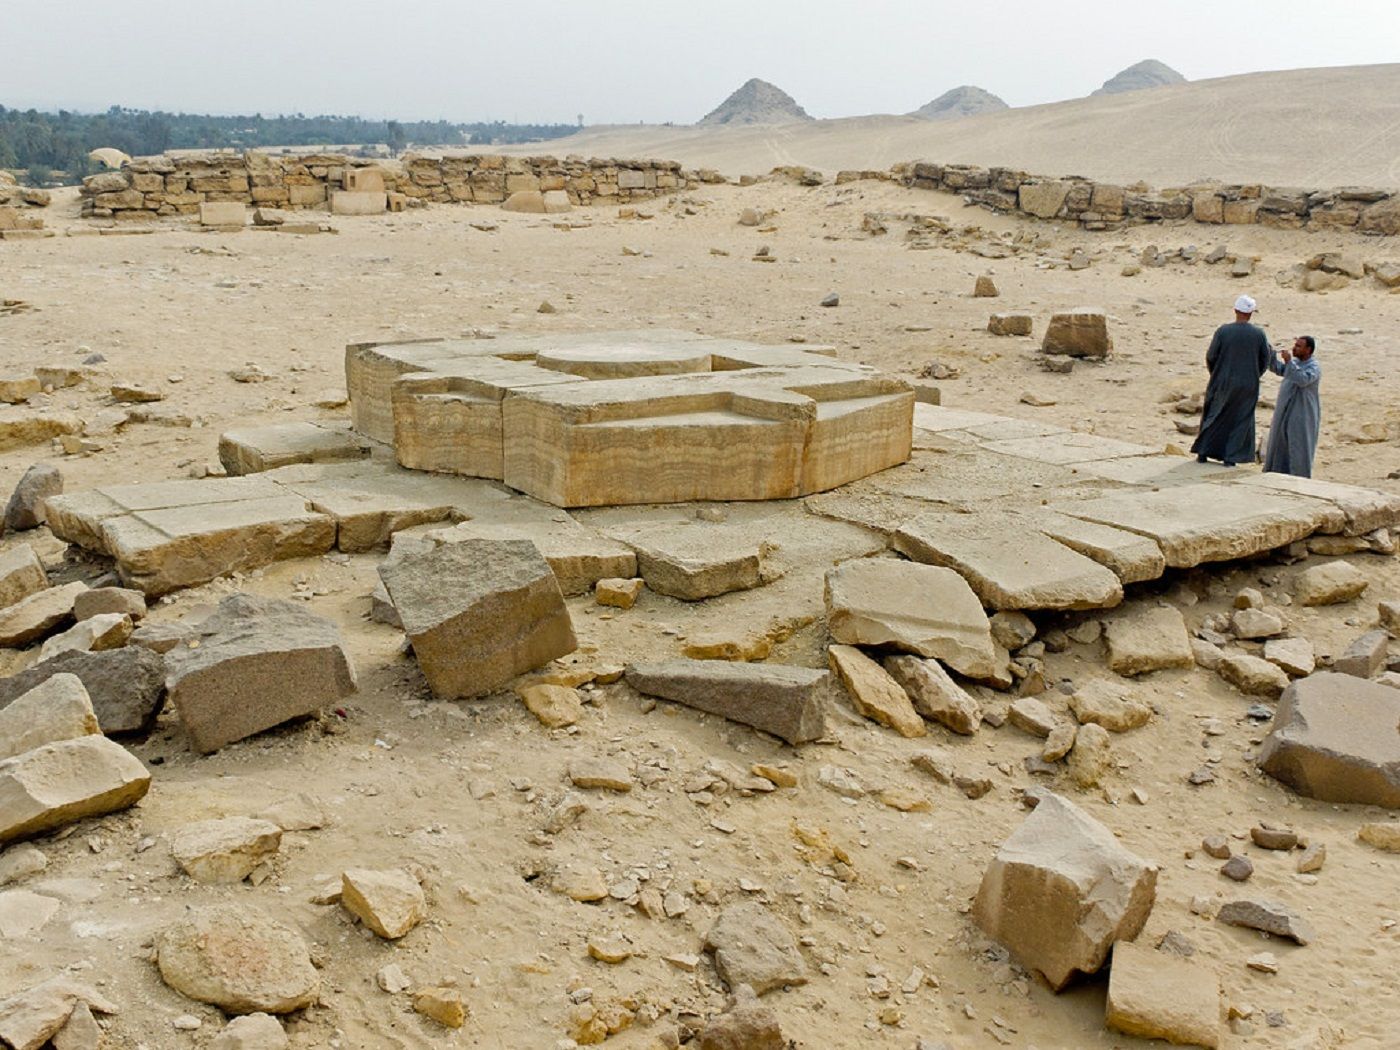 Archaeologists Discover 'Lost,' 4,500-Year-Old Egyptian Sun Temple | Smart News| Smithsonian Magazine